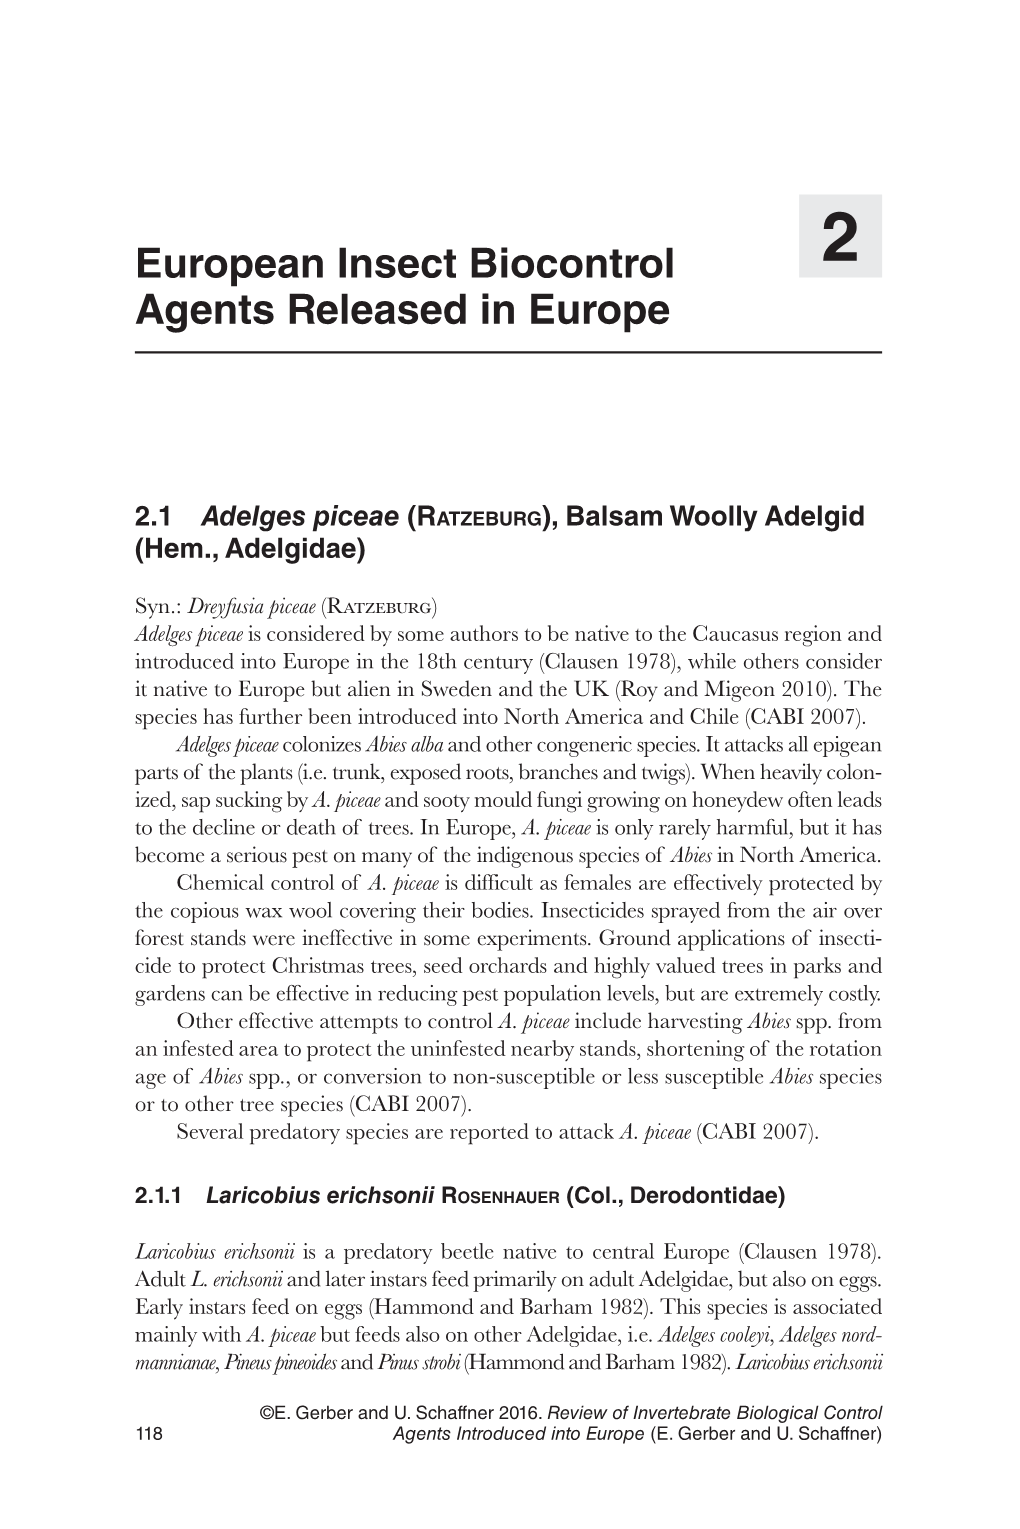 European Insect Biocontrol Agents Released in Europe 119 Has Been Introduced As a Biological Control Agent for A